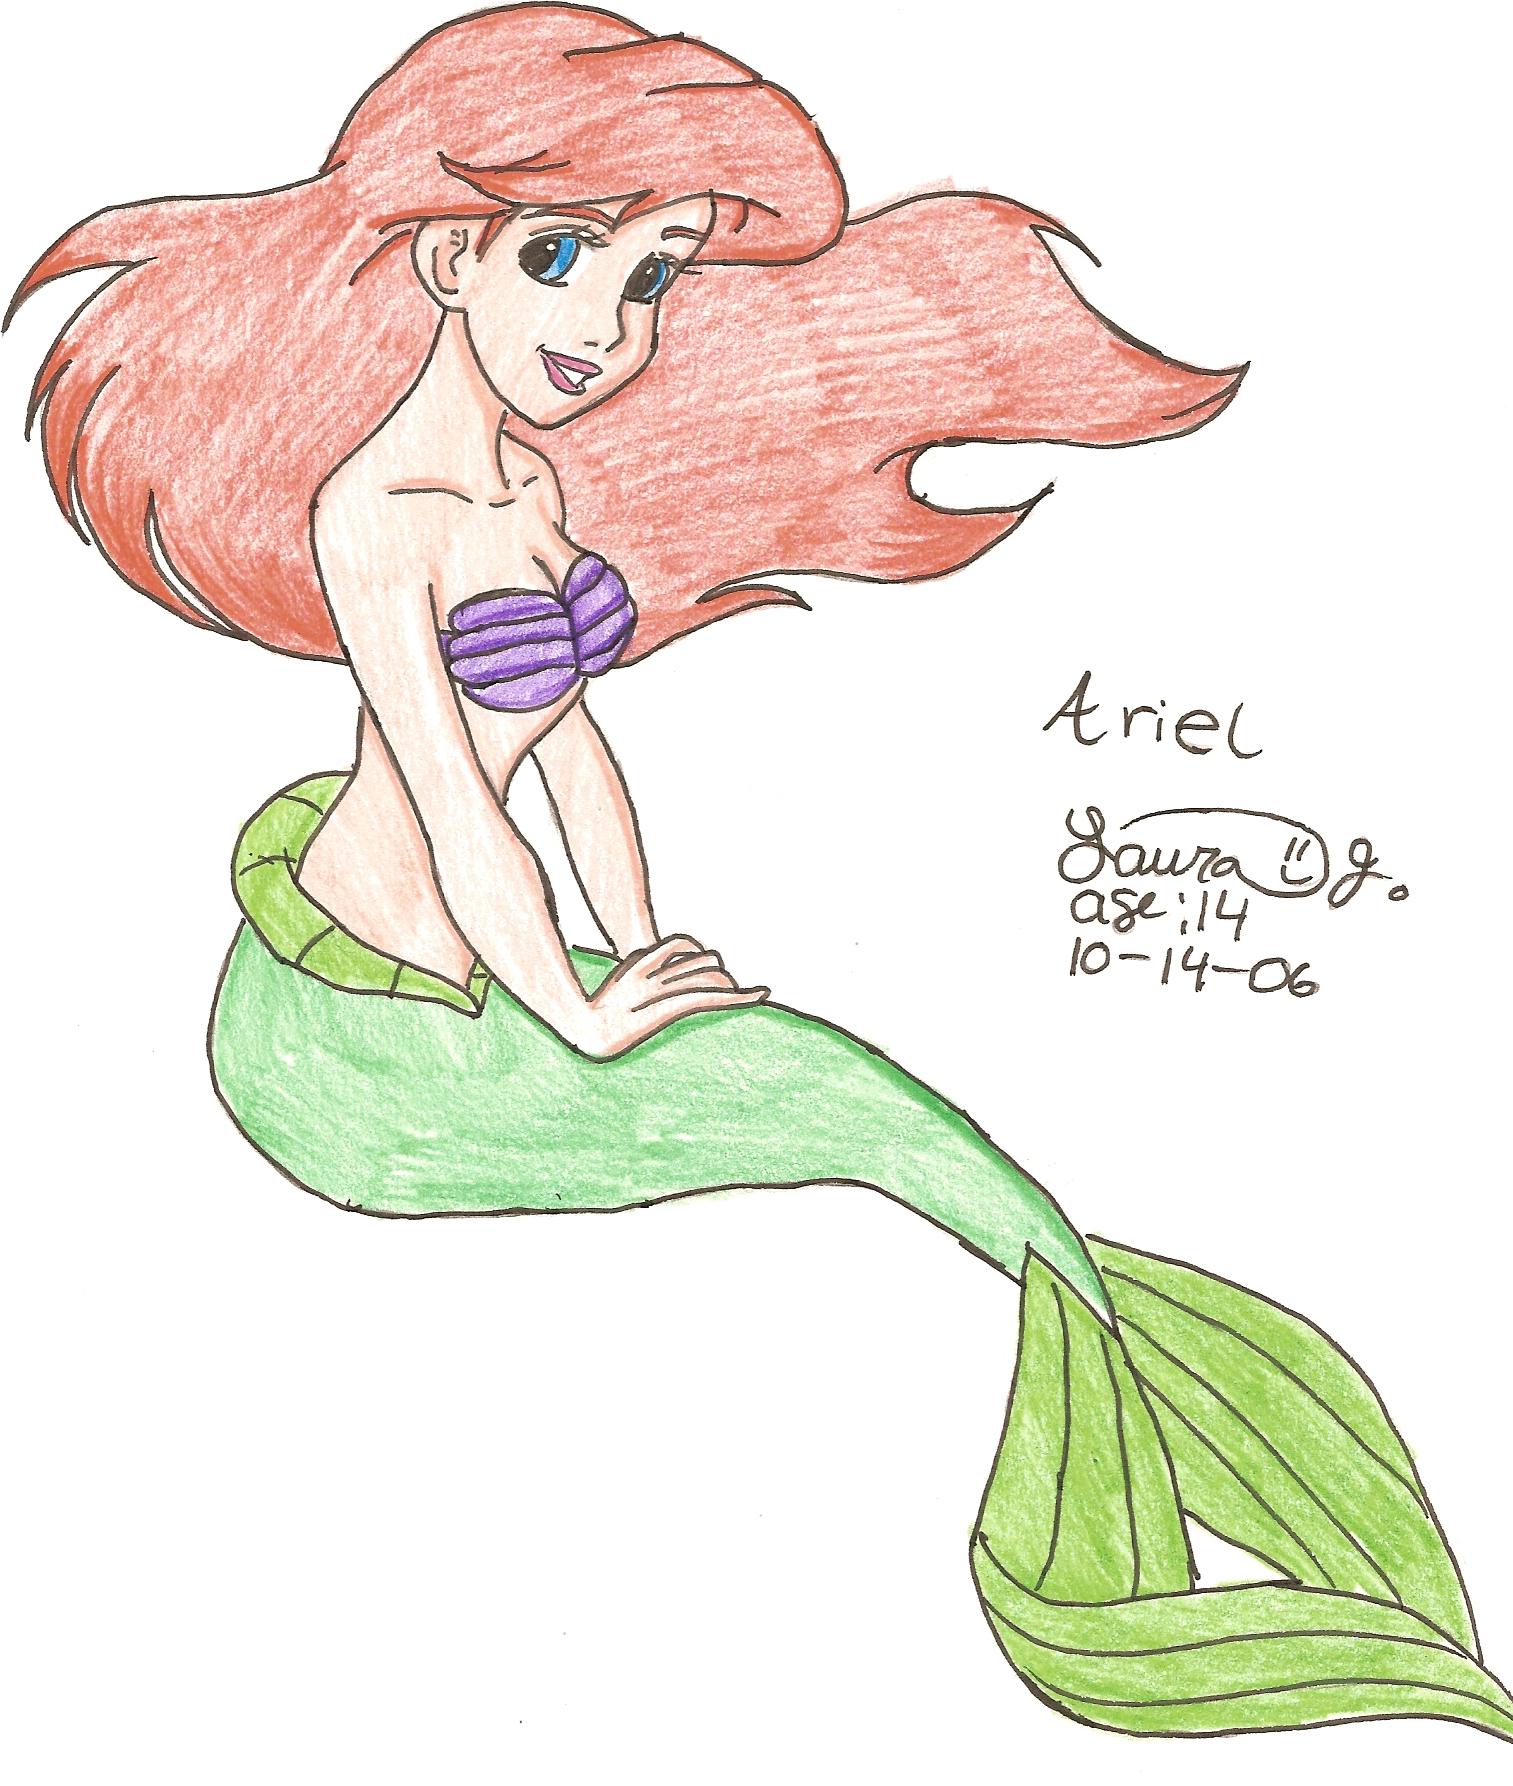 Another Ariel pic by kittysan5